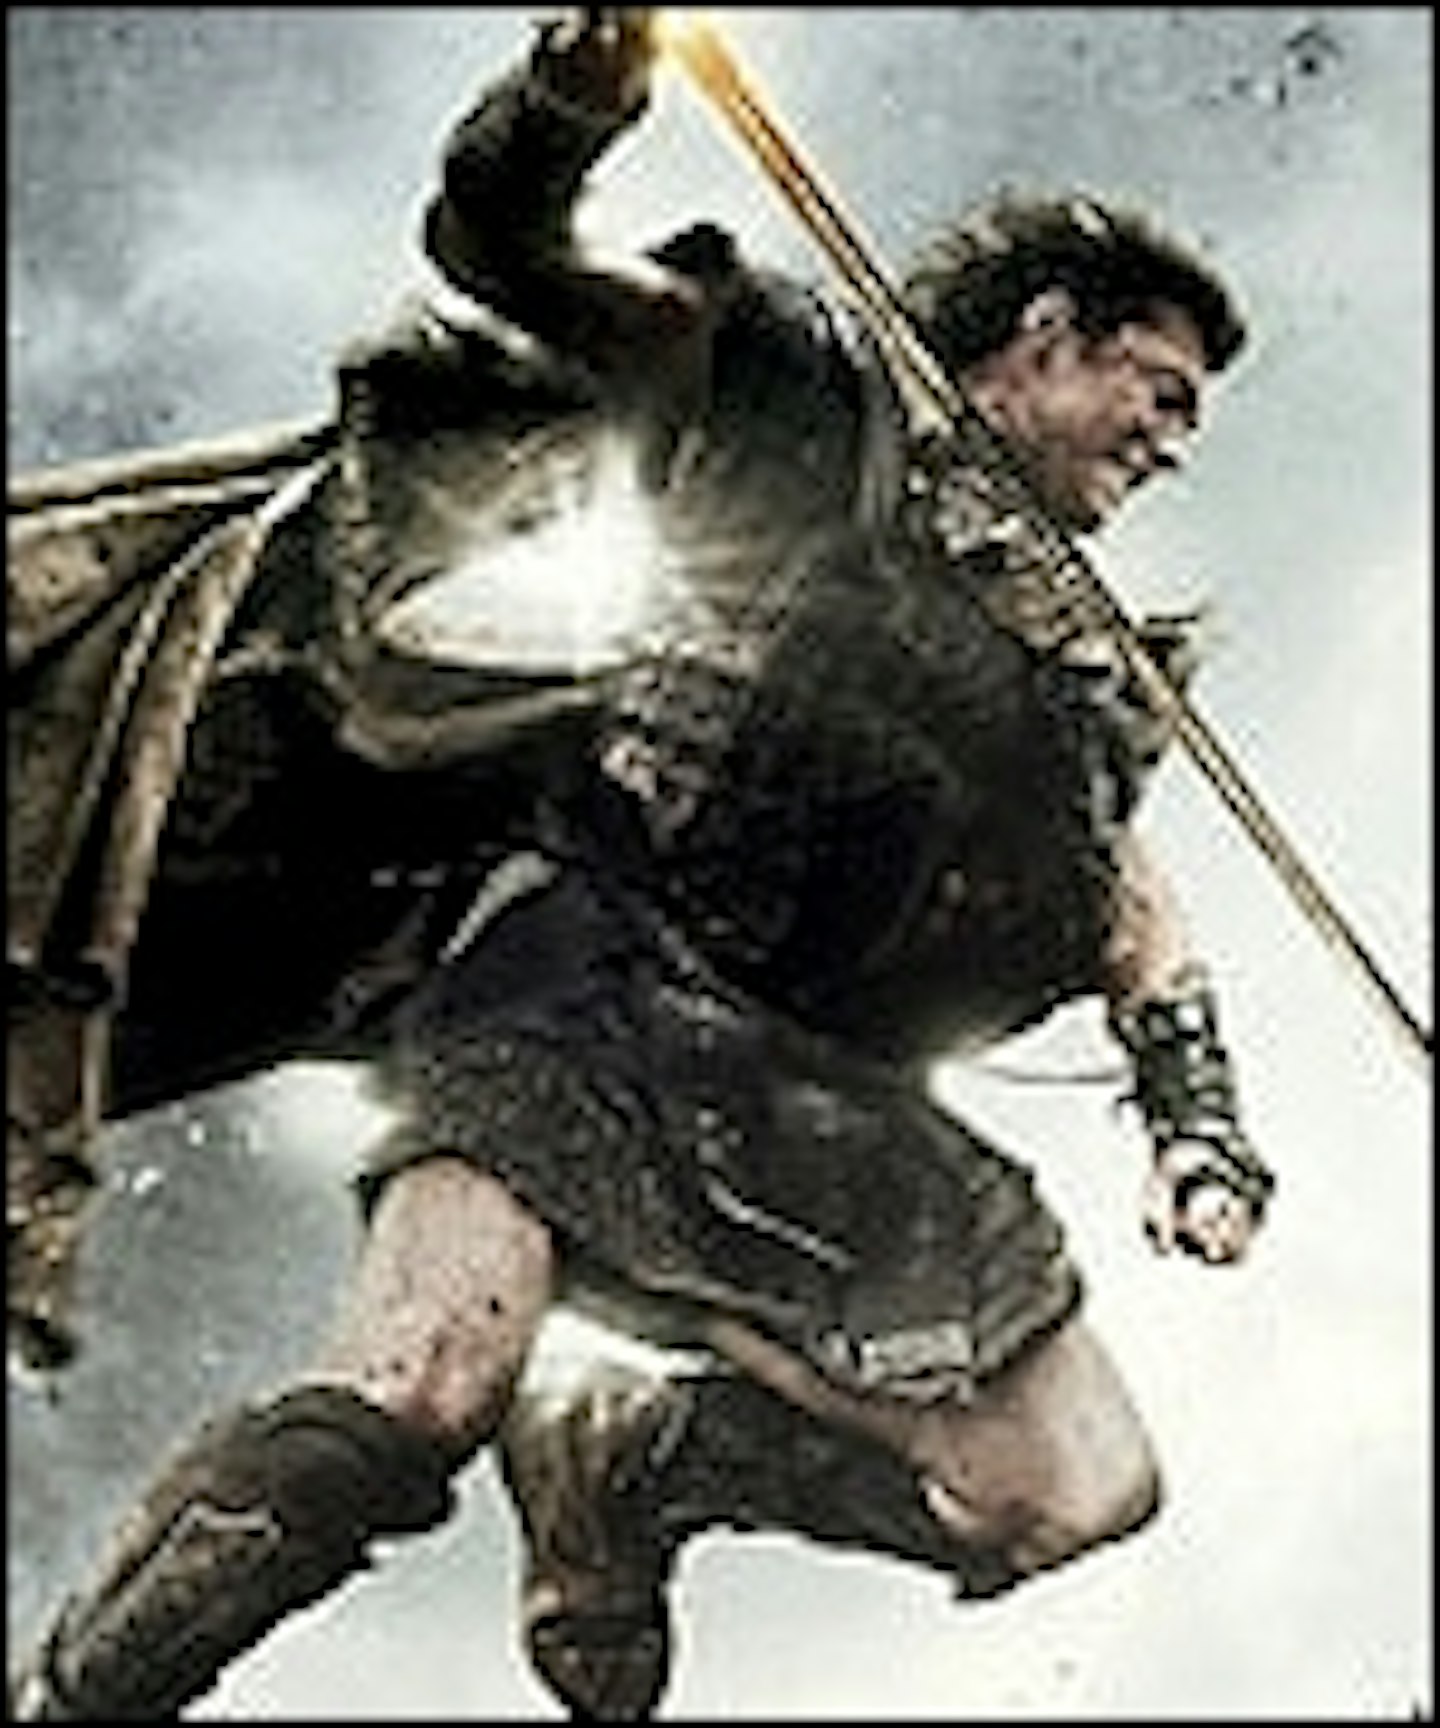 Wrath Of The Titans Trailer Rages Online